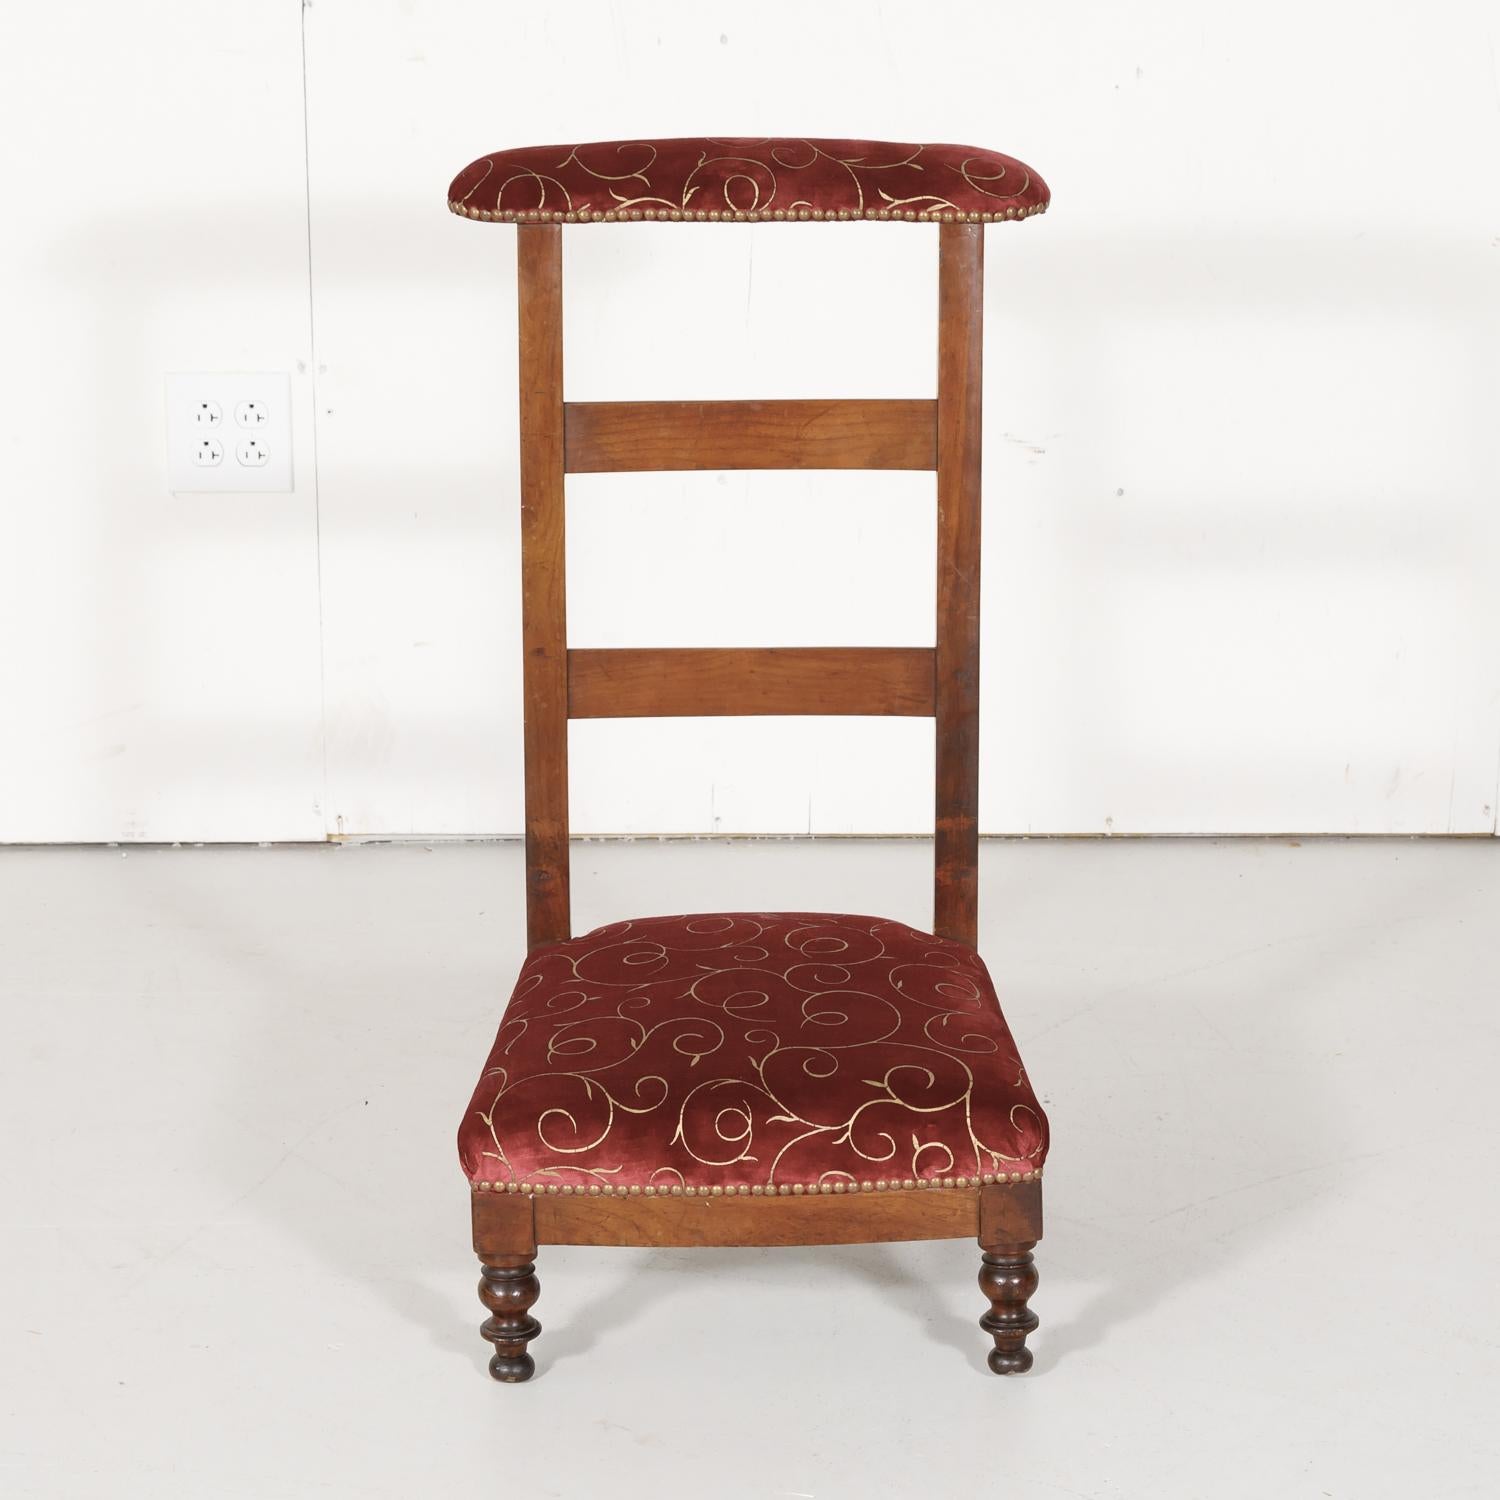 Country French Napoleon III period ladder back prie dieu or prayer chair handcrafted of walnut having the original velvet upholstery, circa 1870s. This charming provincial kneeling chair has its original covered, sloped top to rest one's arms or a